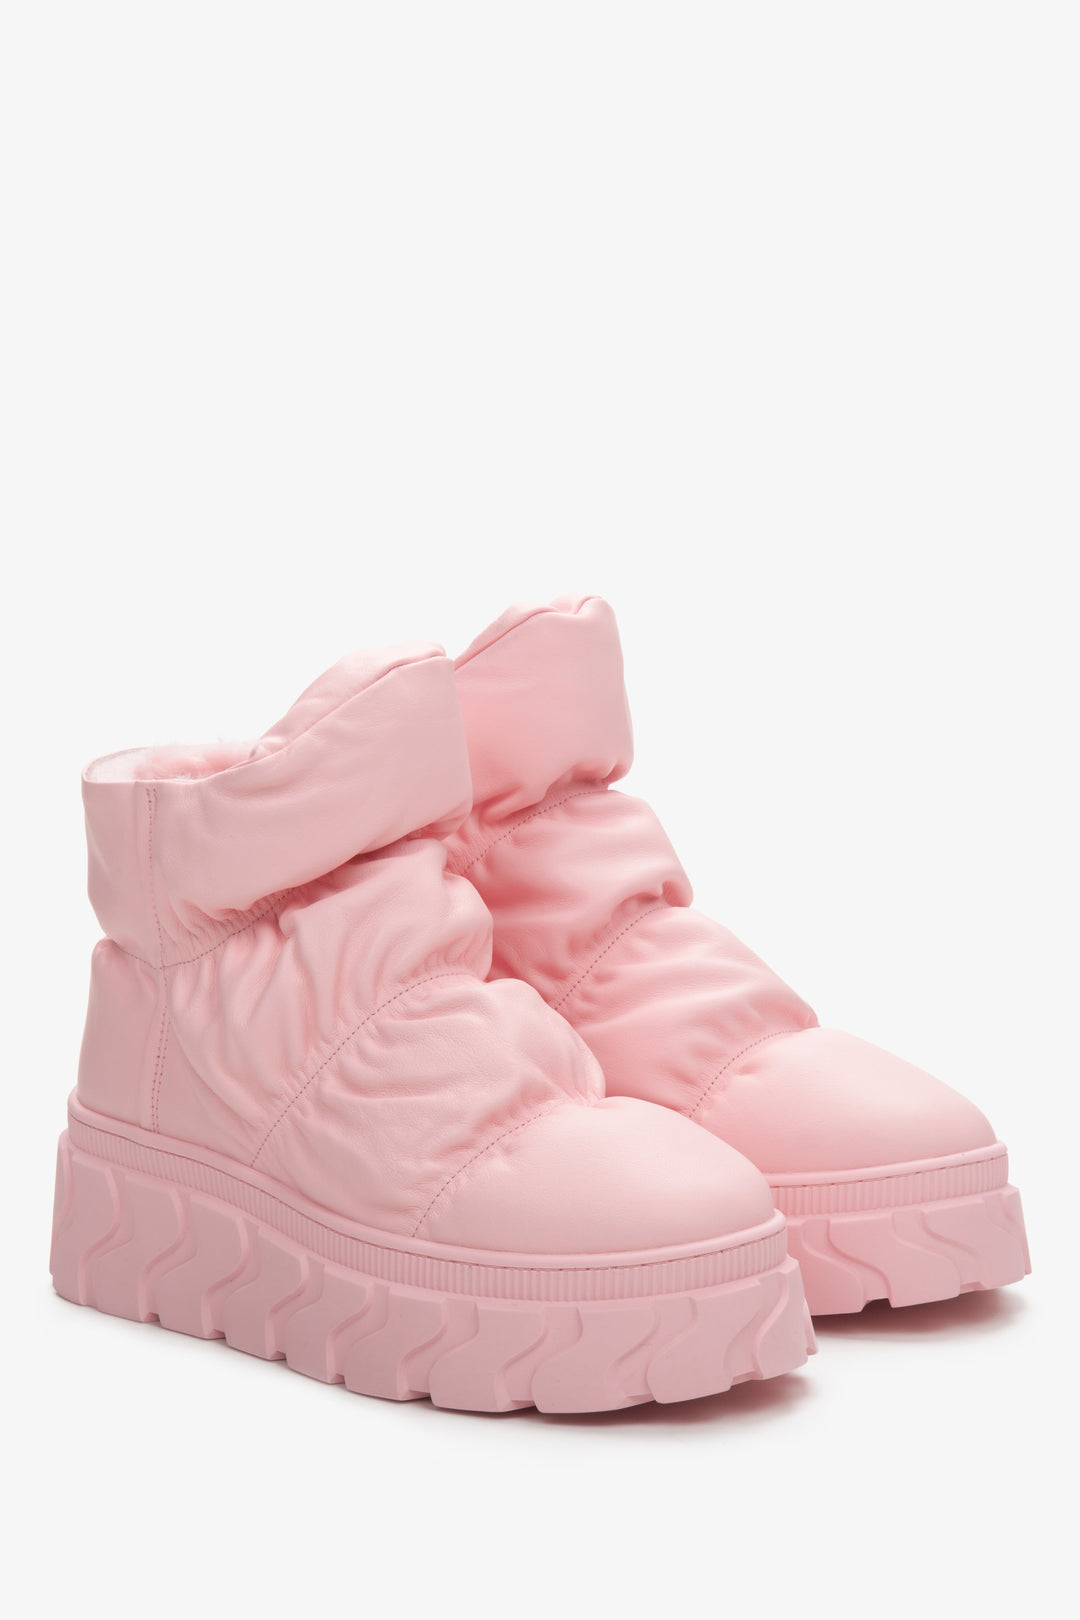 Women's snow boots in pink.